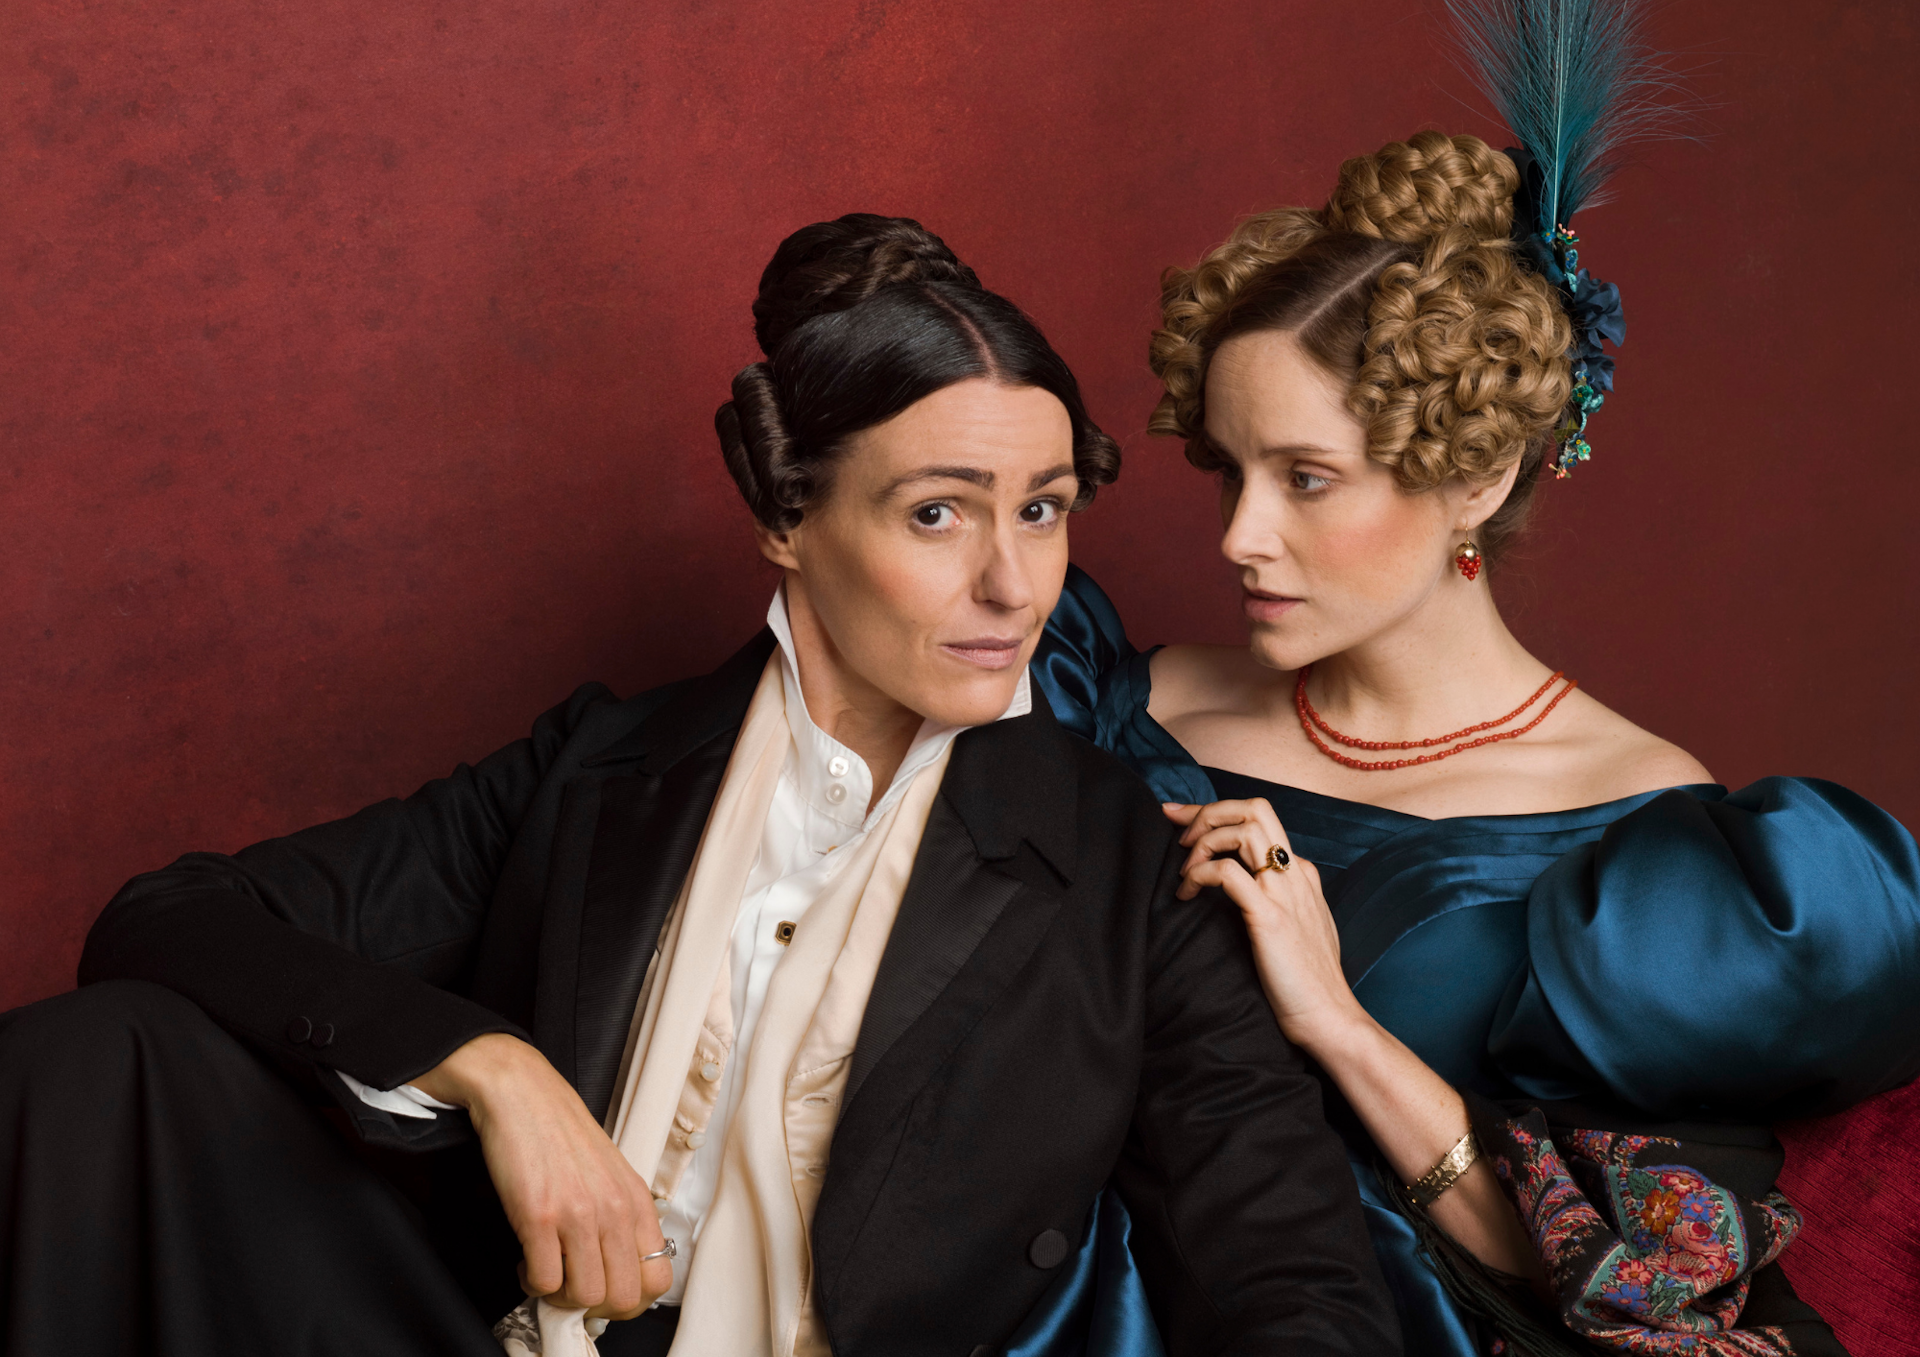 Five lesbian expressions from the 19th century to remember when watching Gentleman Jack